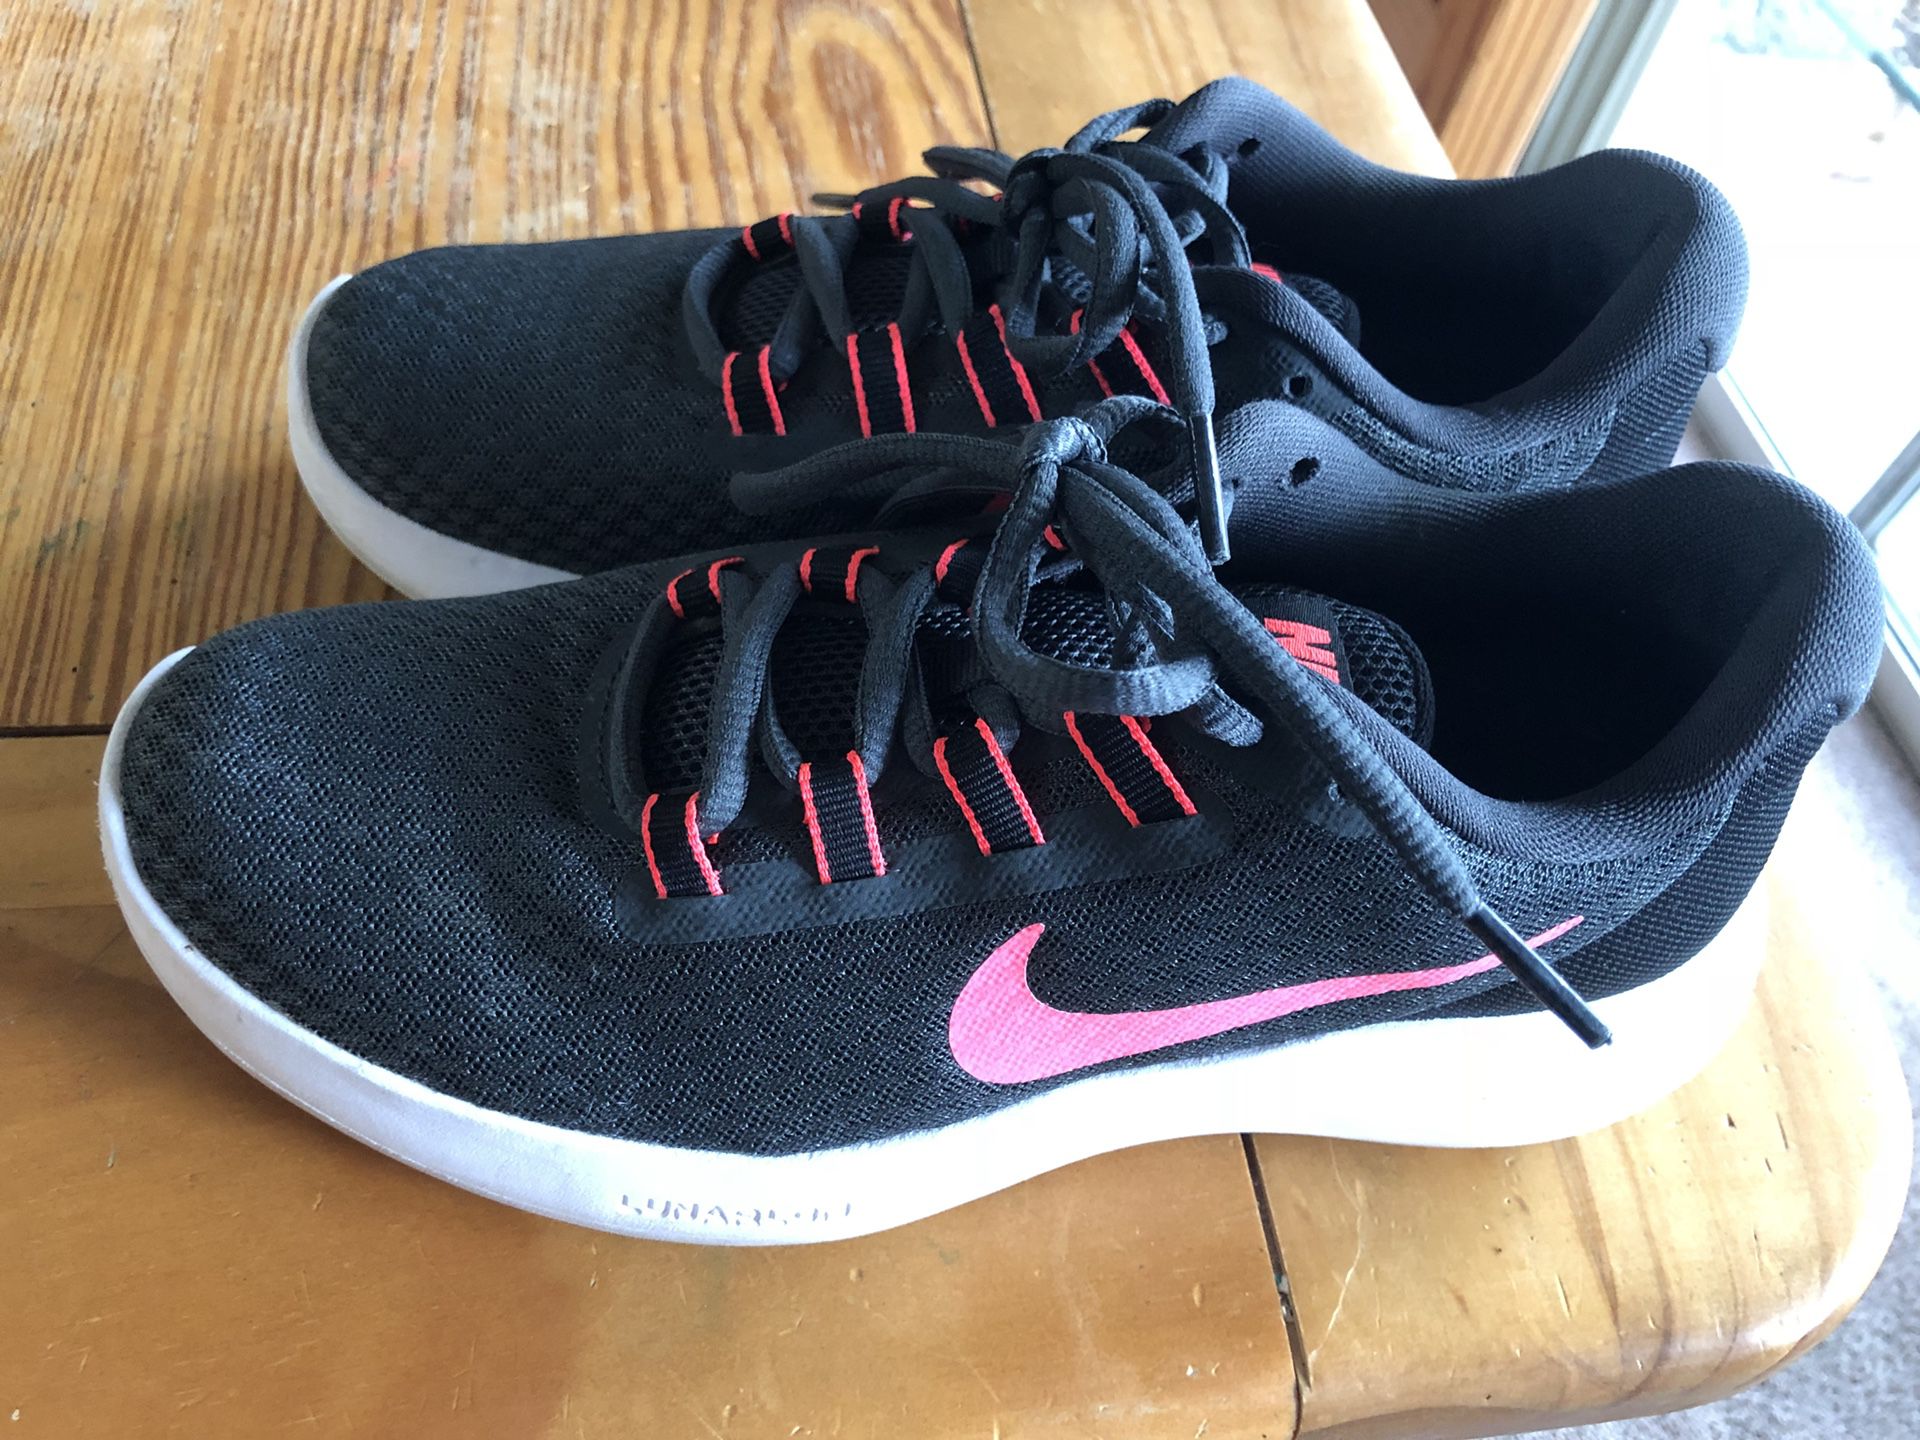 Women's Lunar Converge running shoes for Sale Woodland, CA - OfferUp